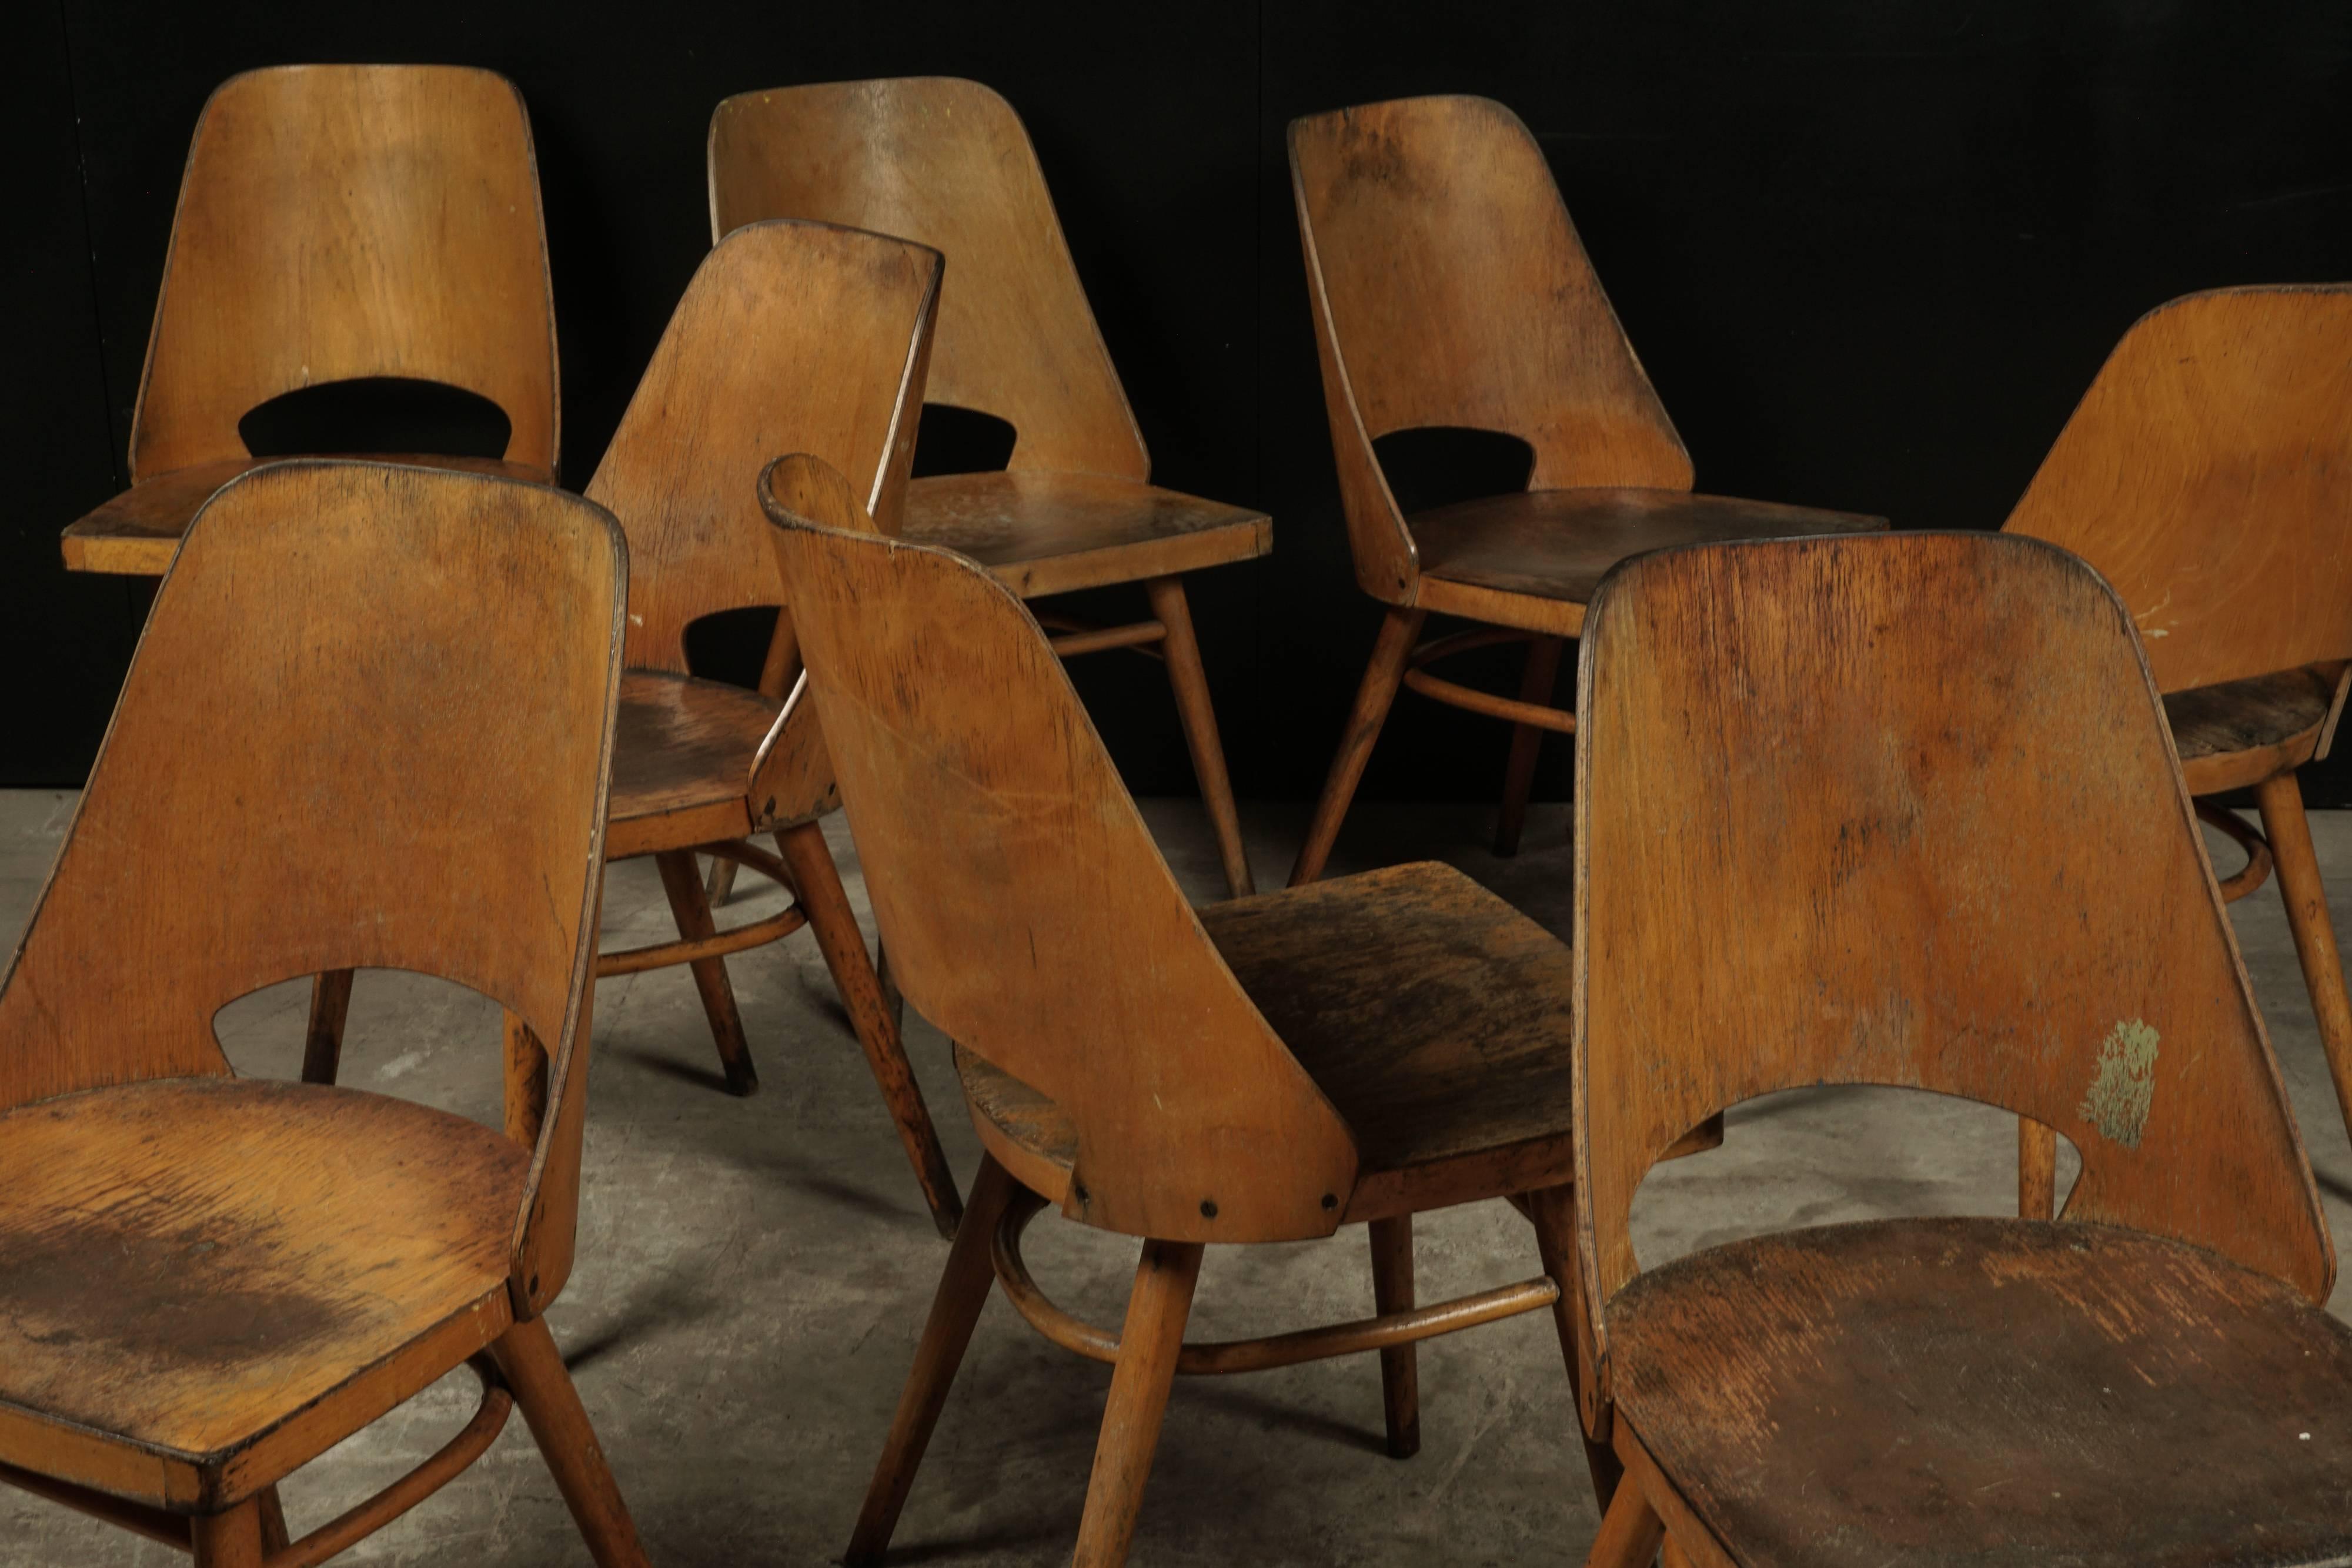 Mid-20th Century Set of Eight Shell Chairs from Czech Republic, circa 1960